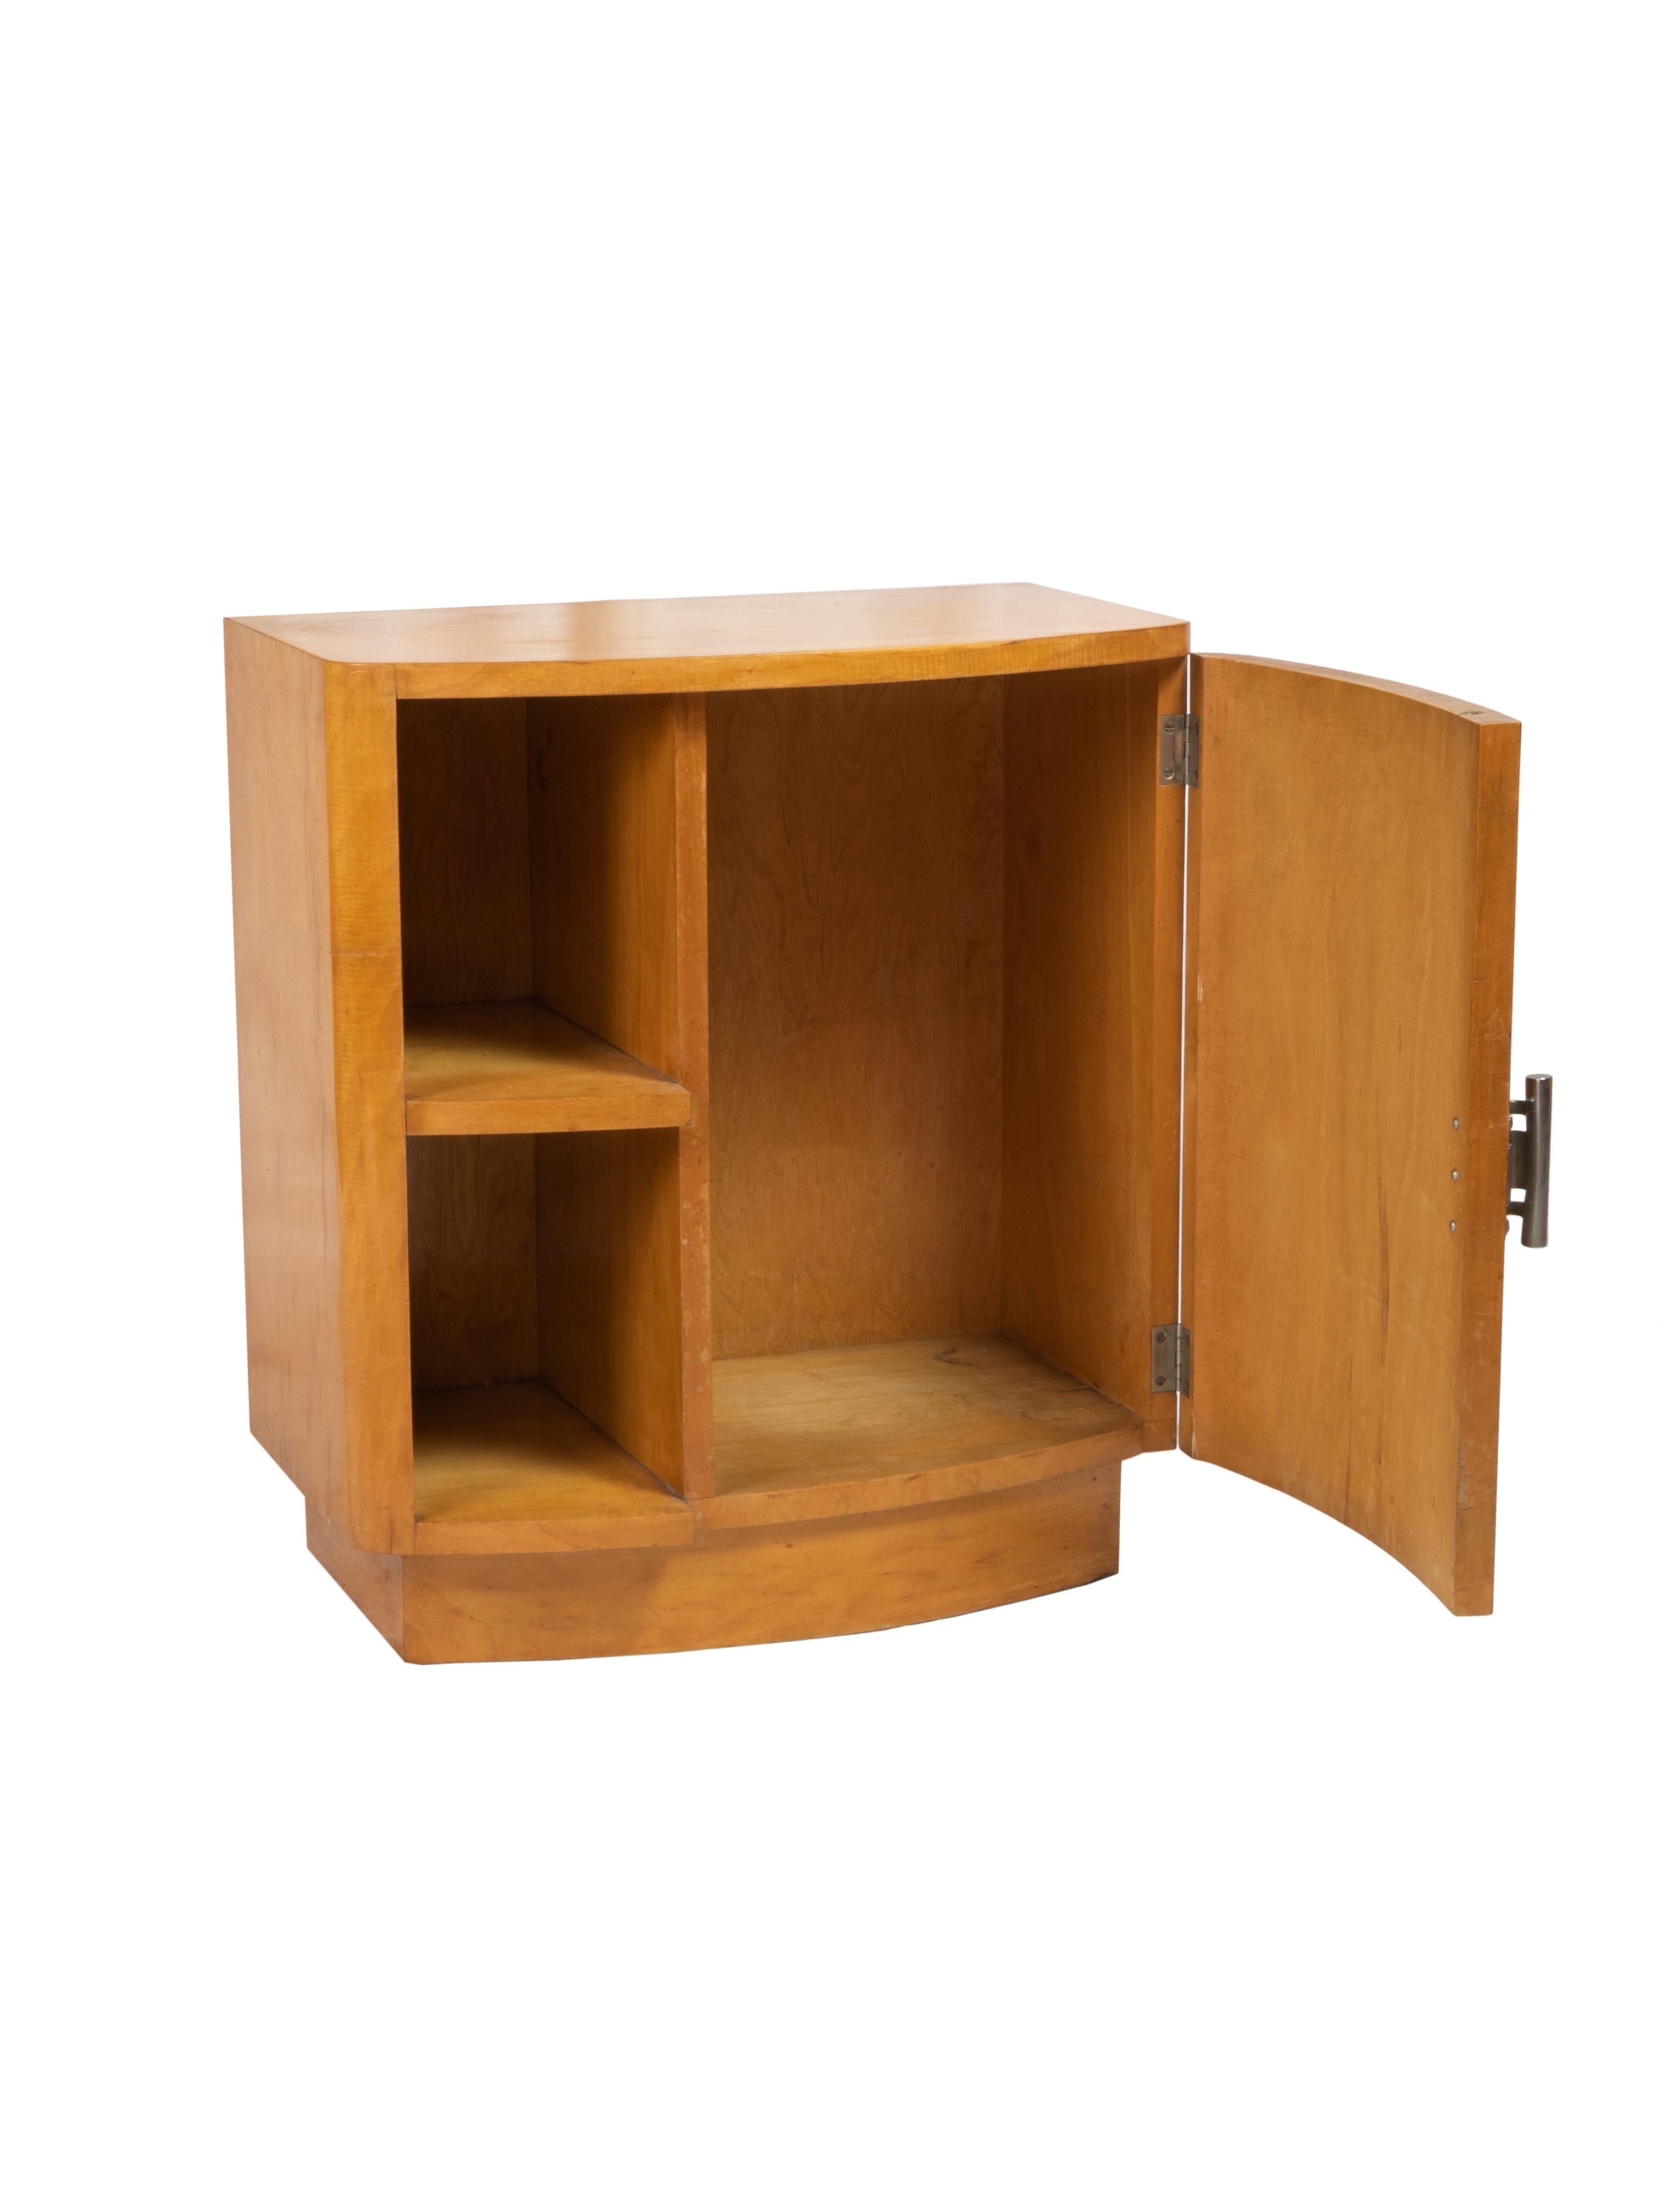 An elegant light color  spruce wood support piece with a bookcase on the left side and door on the right side. Small piece within hardware.
Order, color, geometry, words that define the Art Deco world. 
In Portugal, examples like this one were